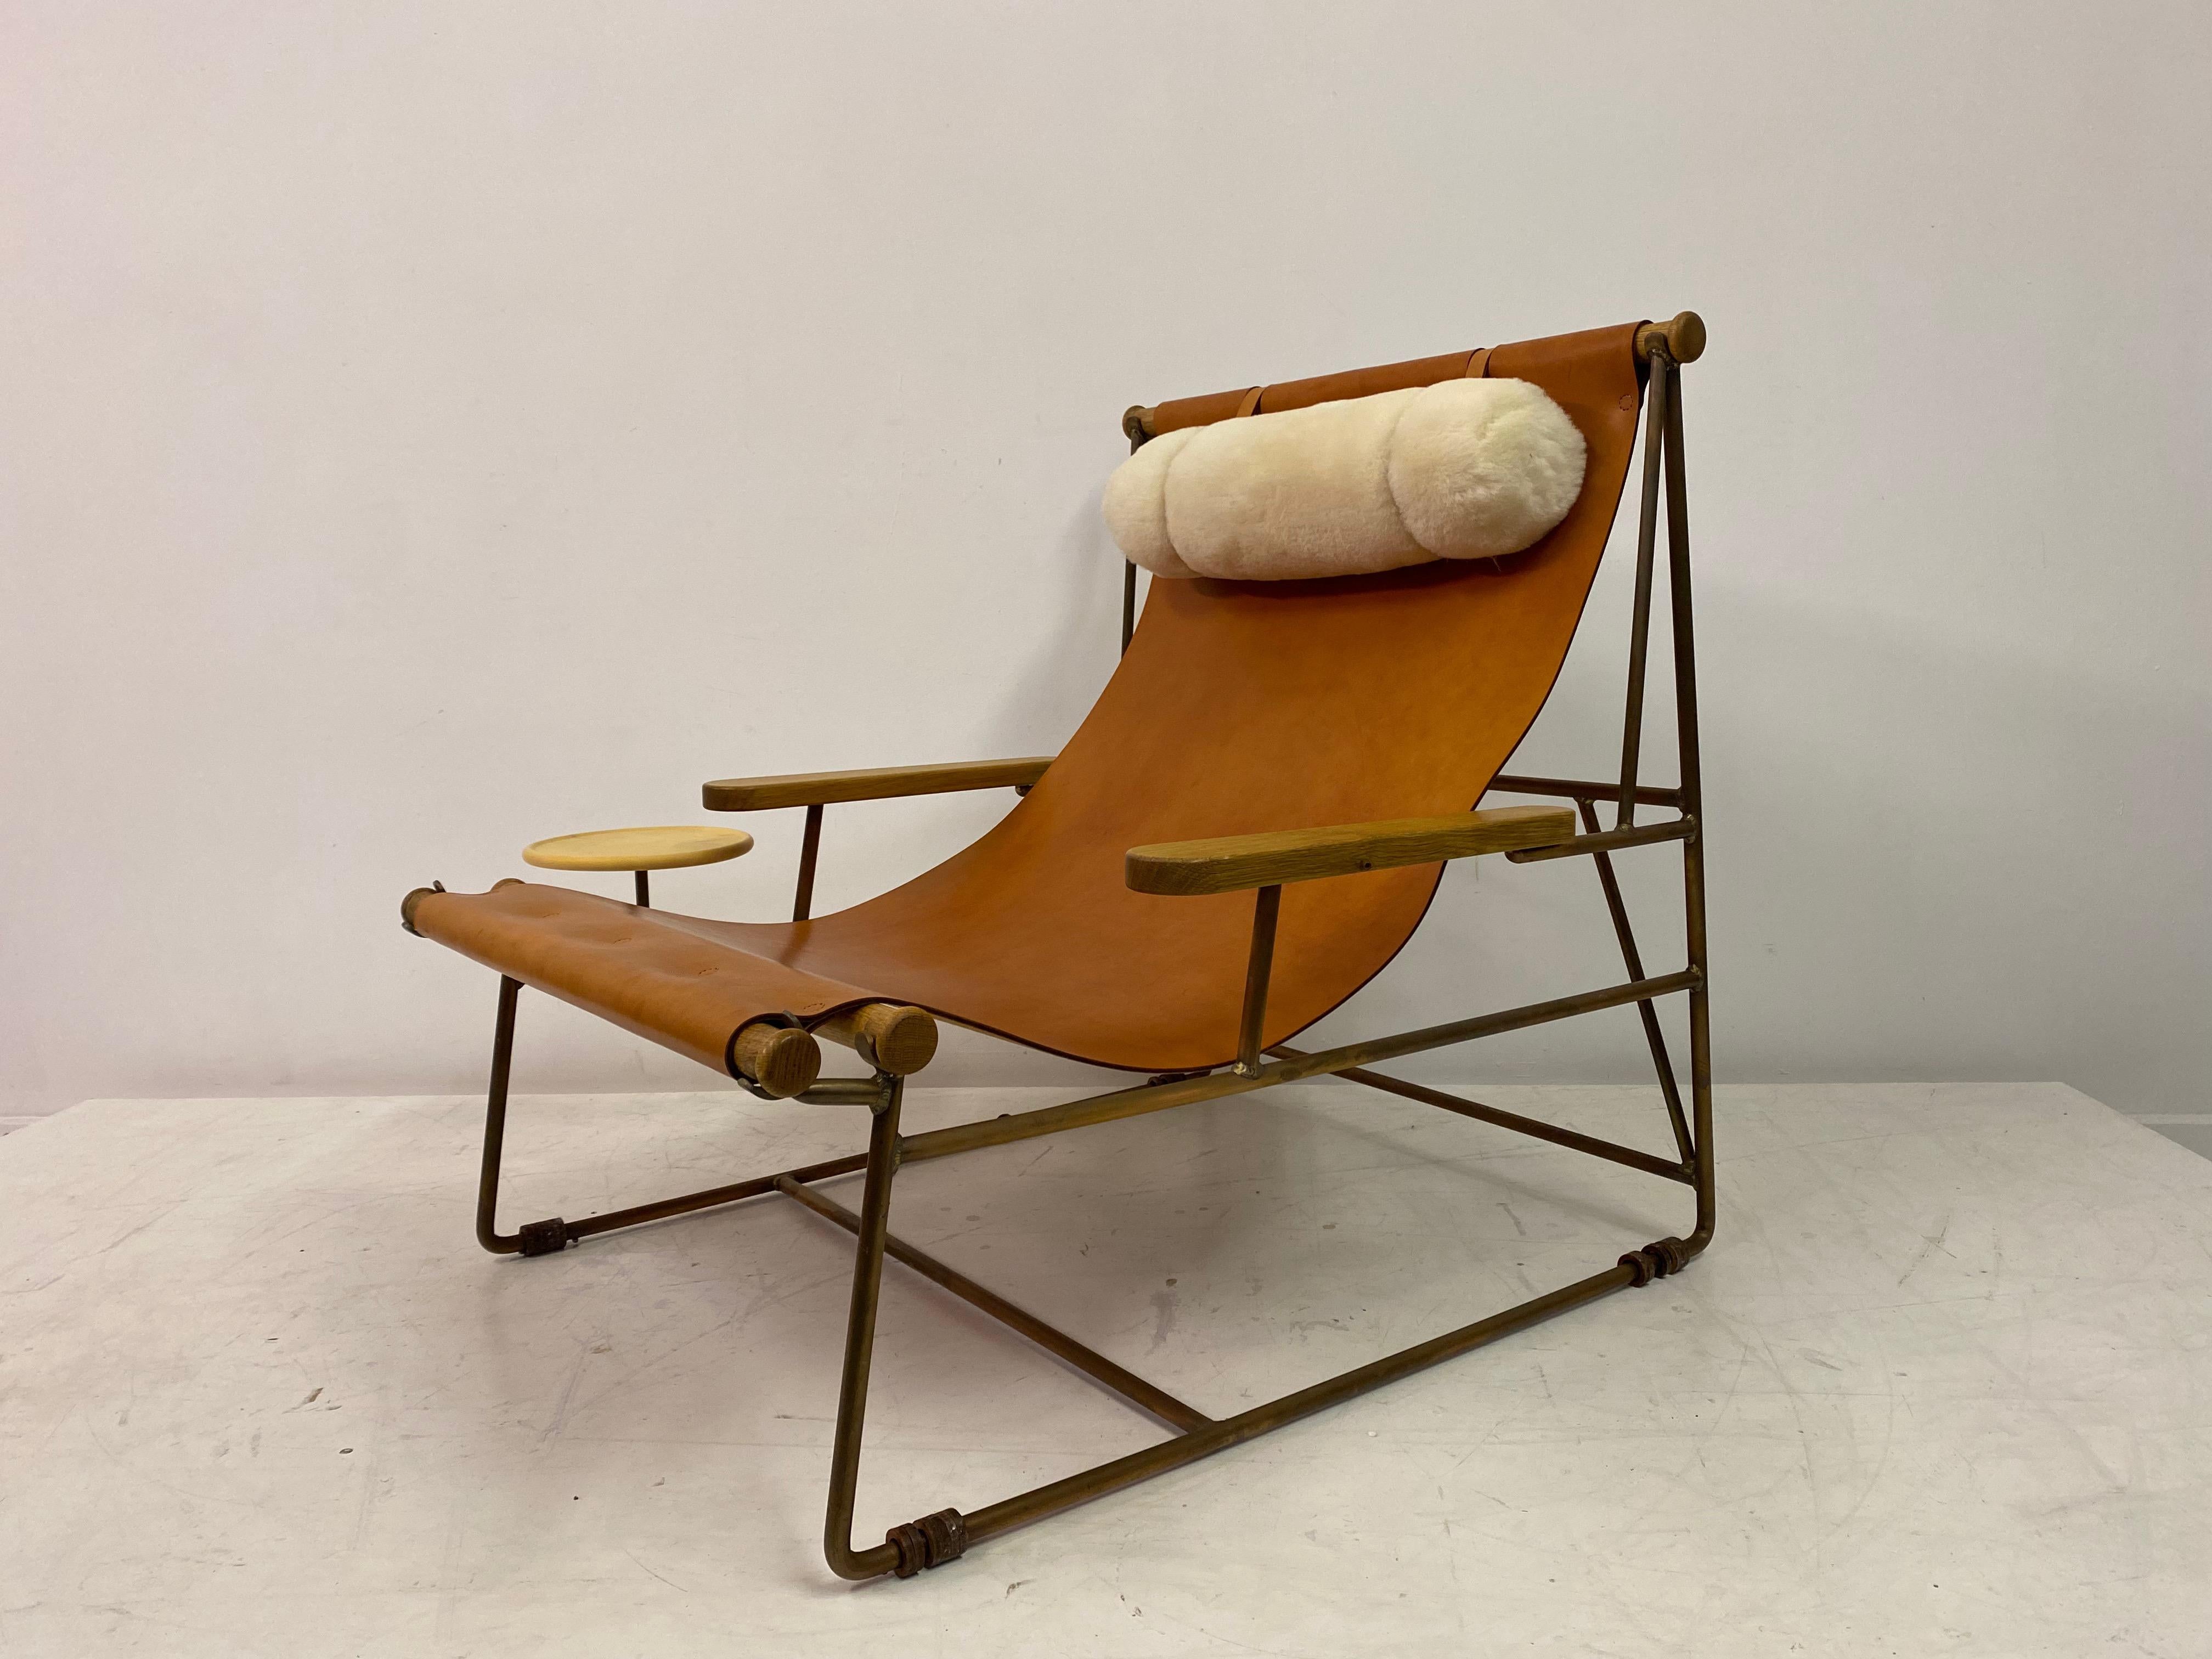 Bronze Leather Deck Lounge Chair by Tyler Hays for BDDW